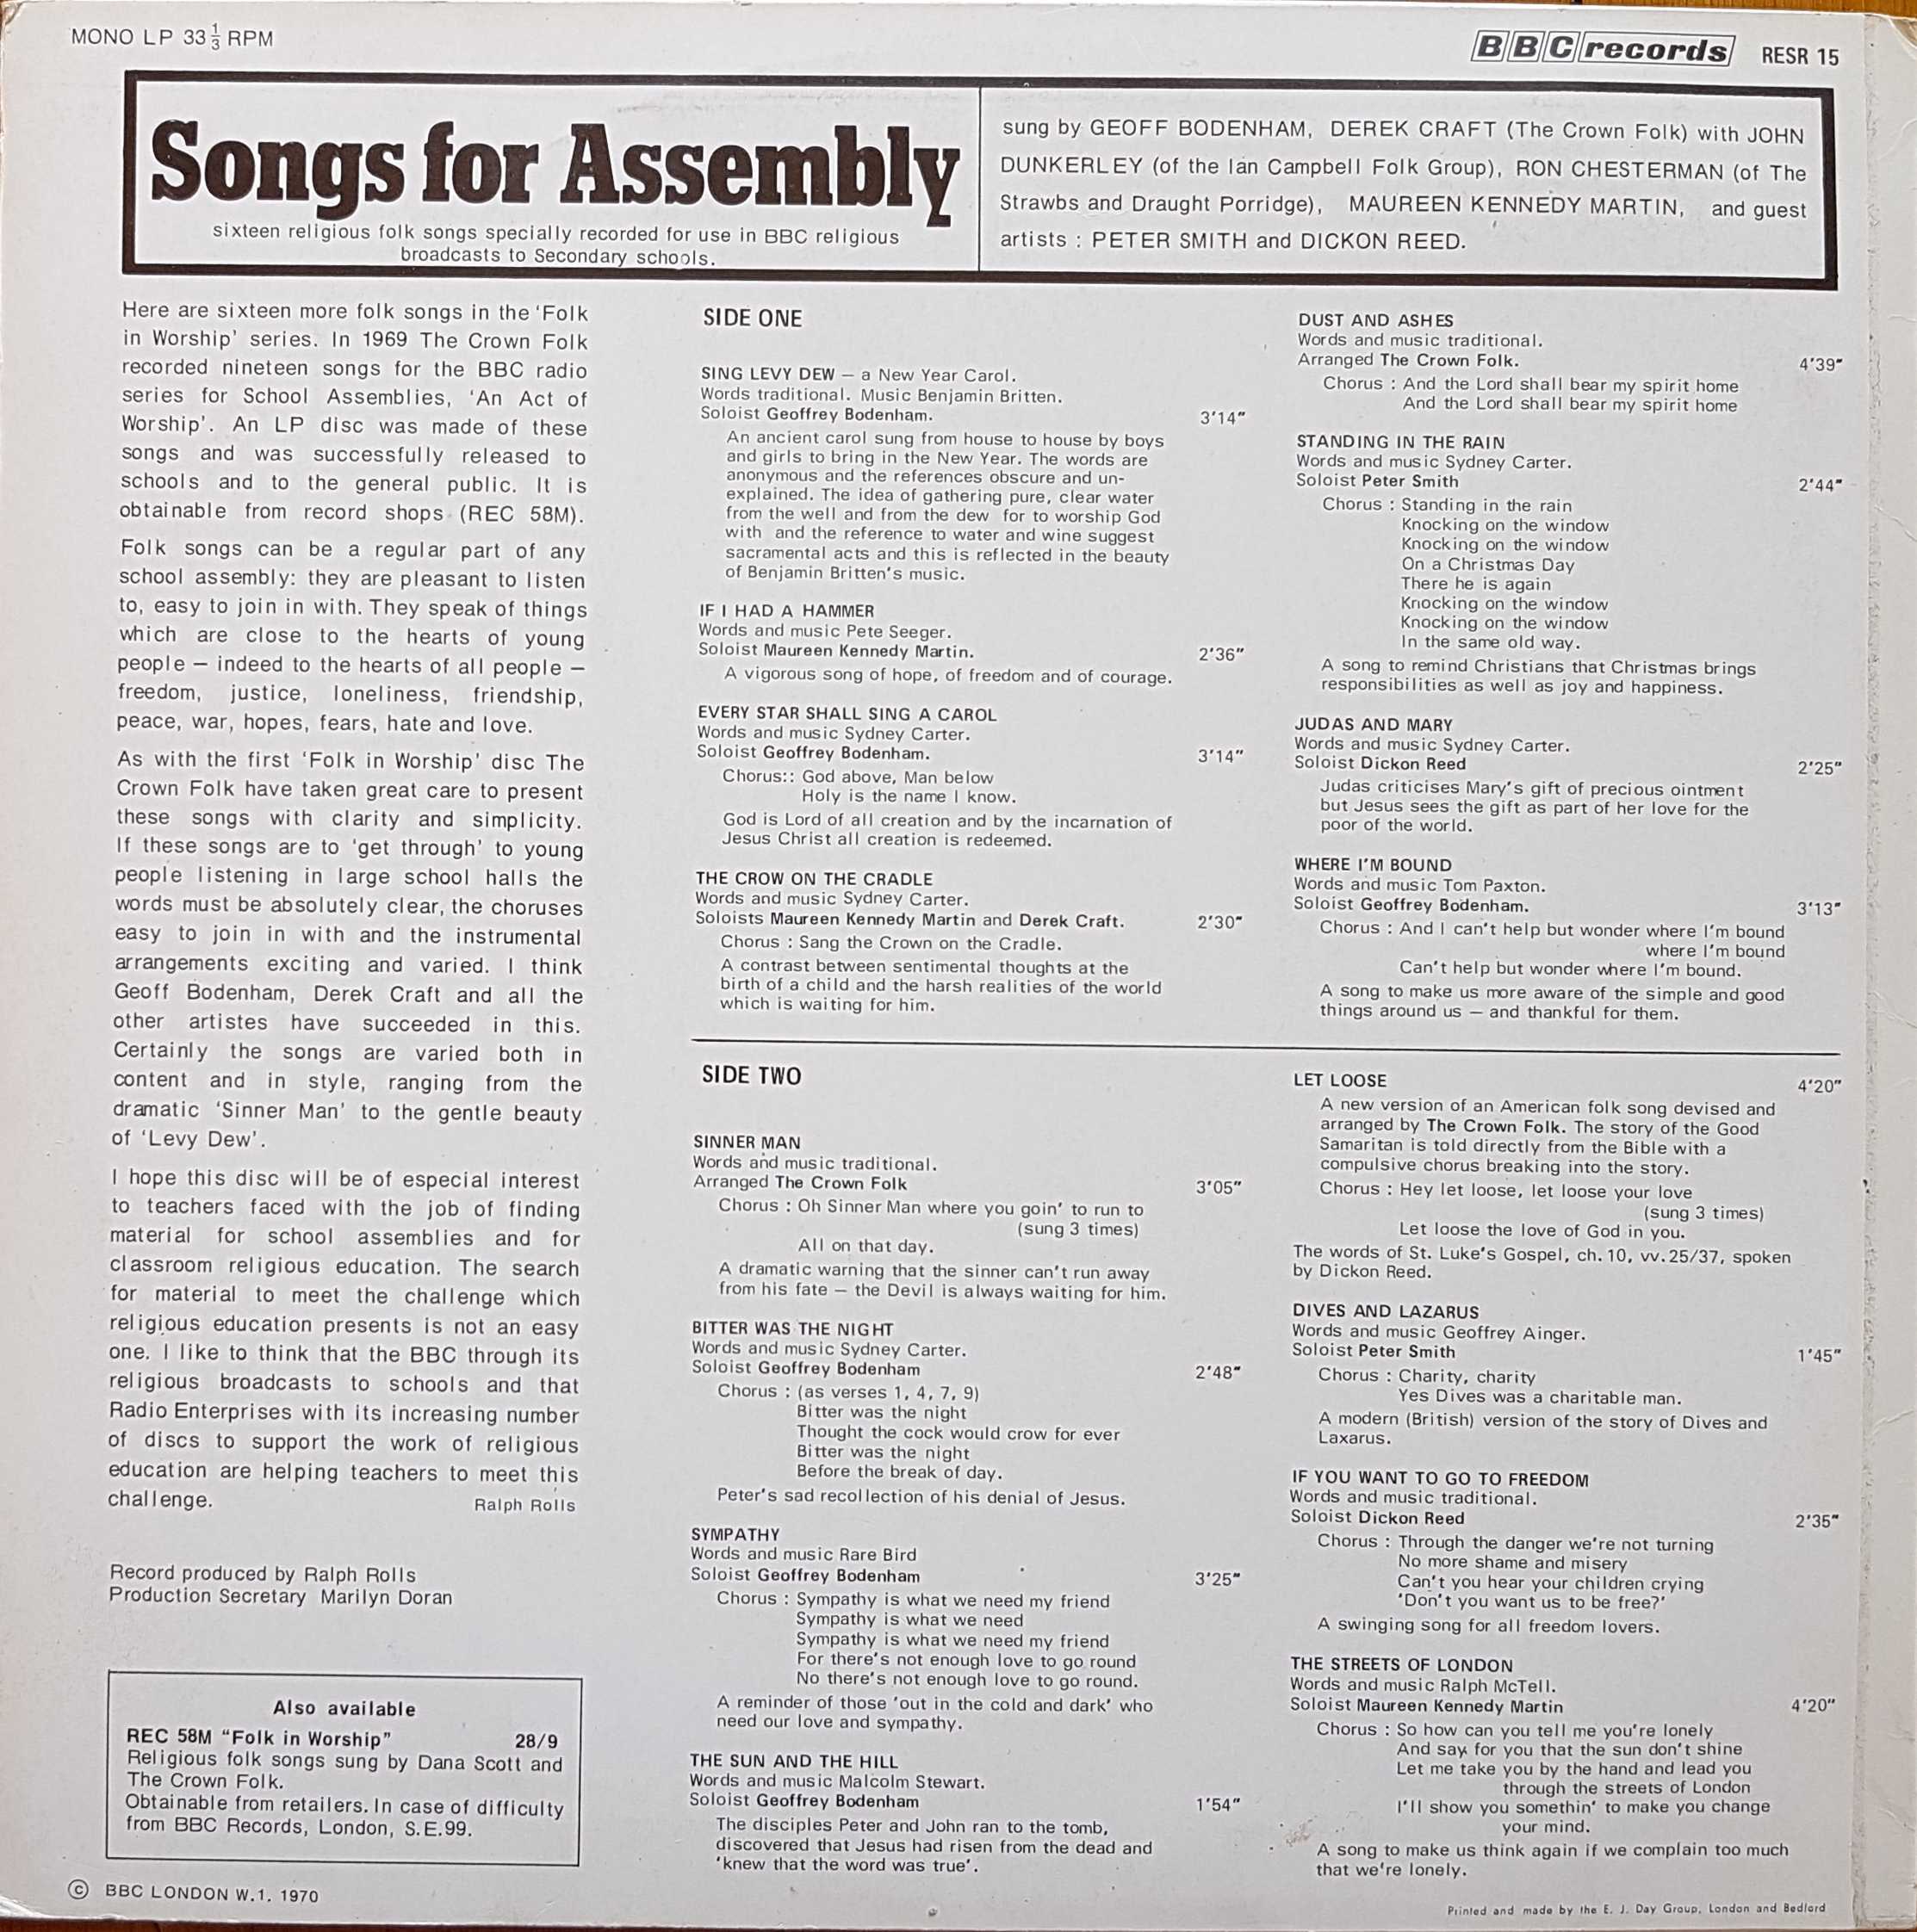 Picture of RESR 15 Songs for assembly by artist The Crown Folk / Maureen Kennedy Martin / Peter Smith / Dickon Reed from the BBC records and Tapes library